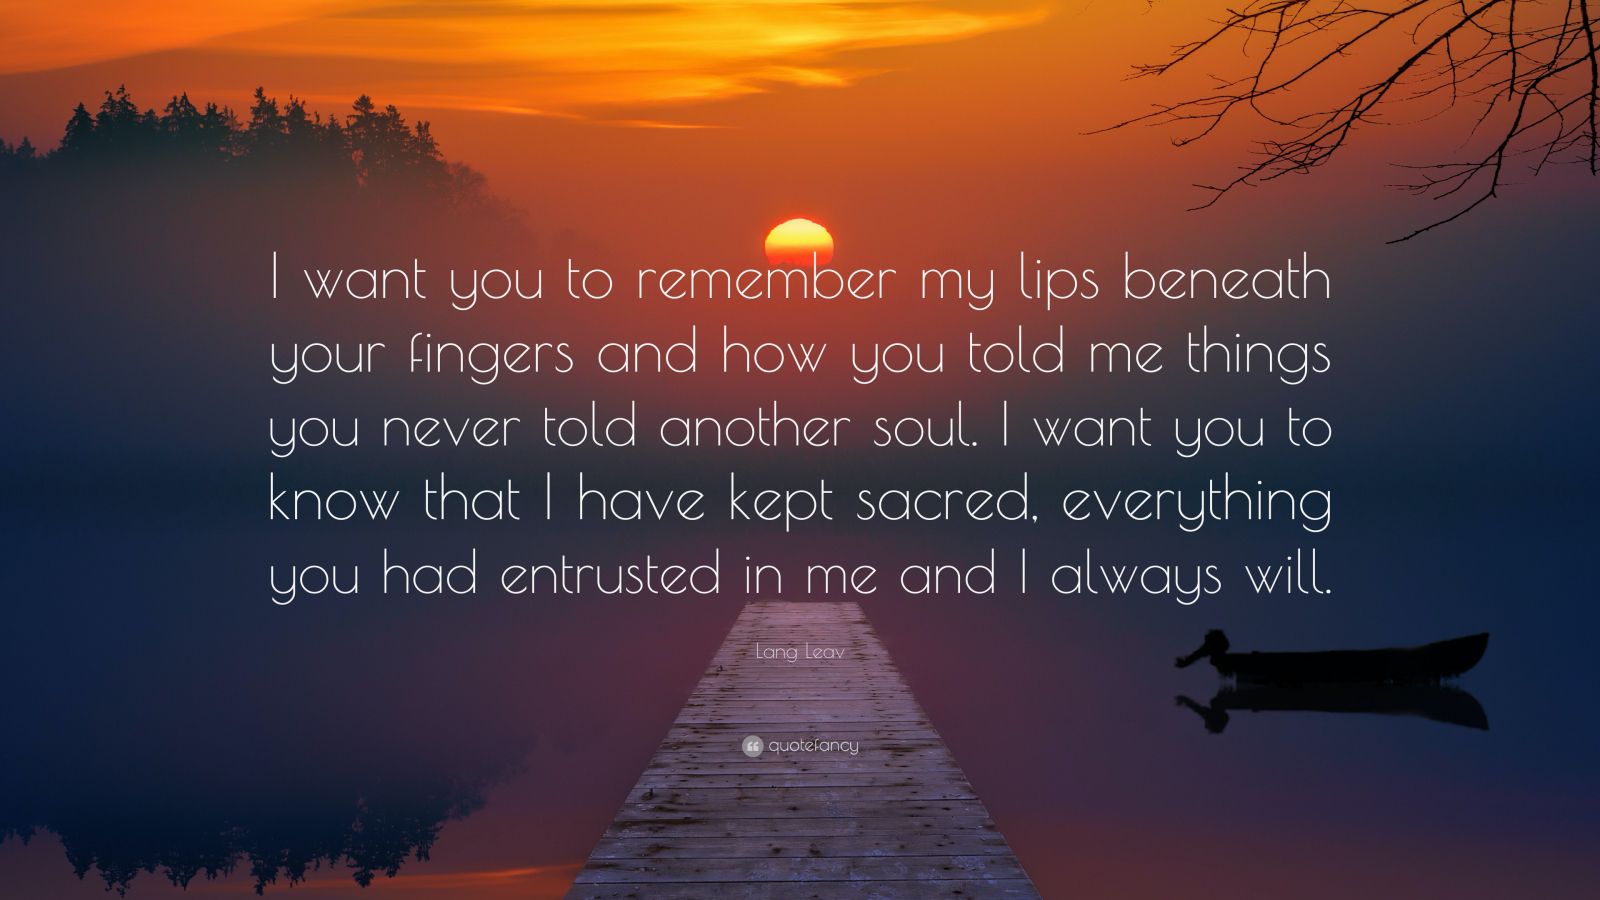 Lang Leav Quote: “I want you to remember my lips beneath your fingers ...